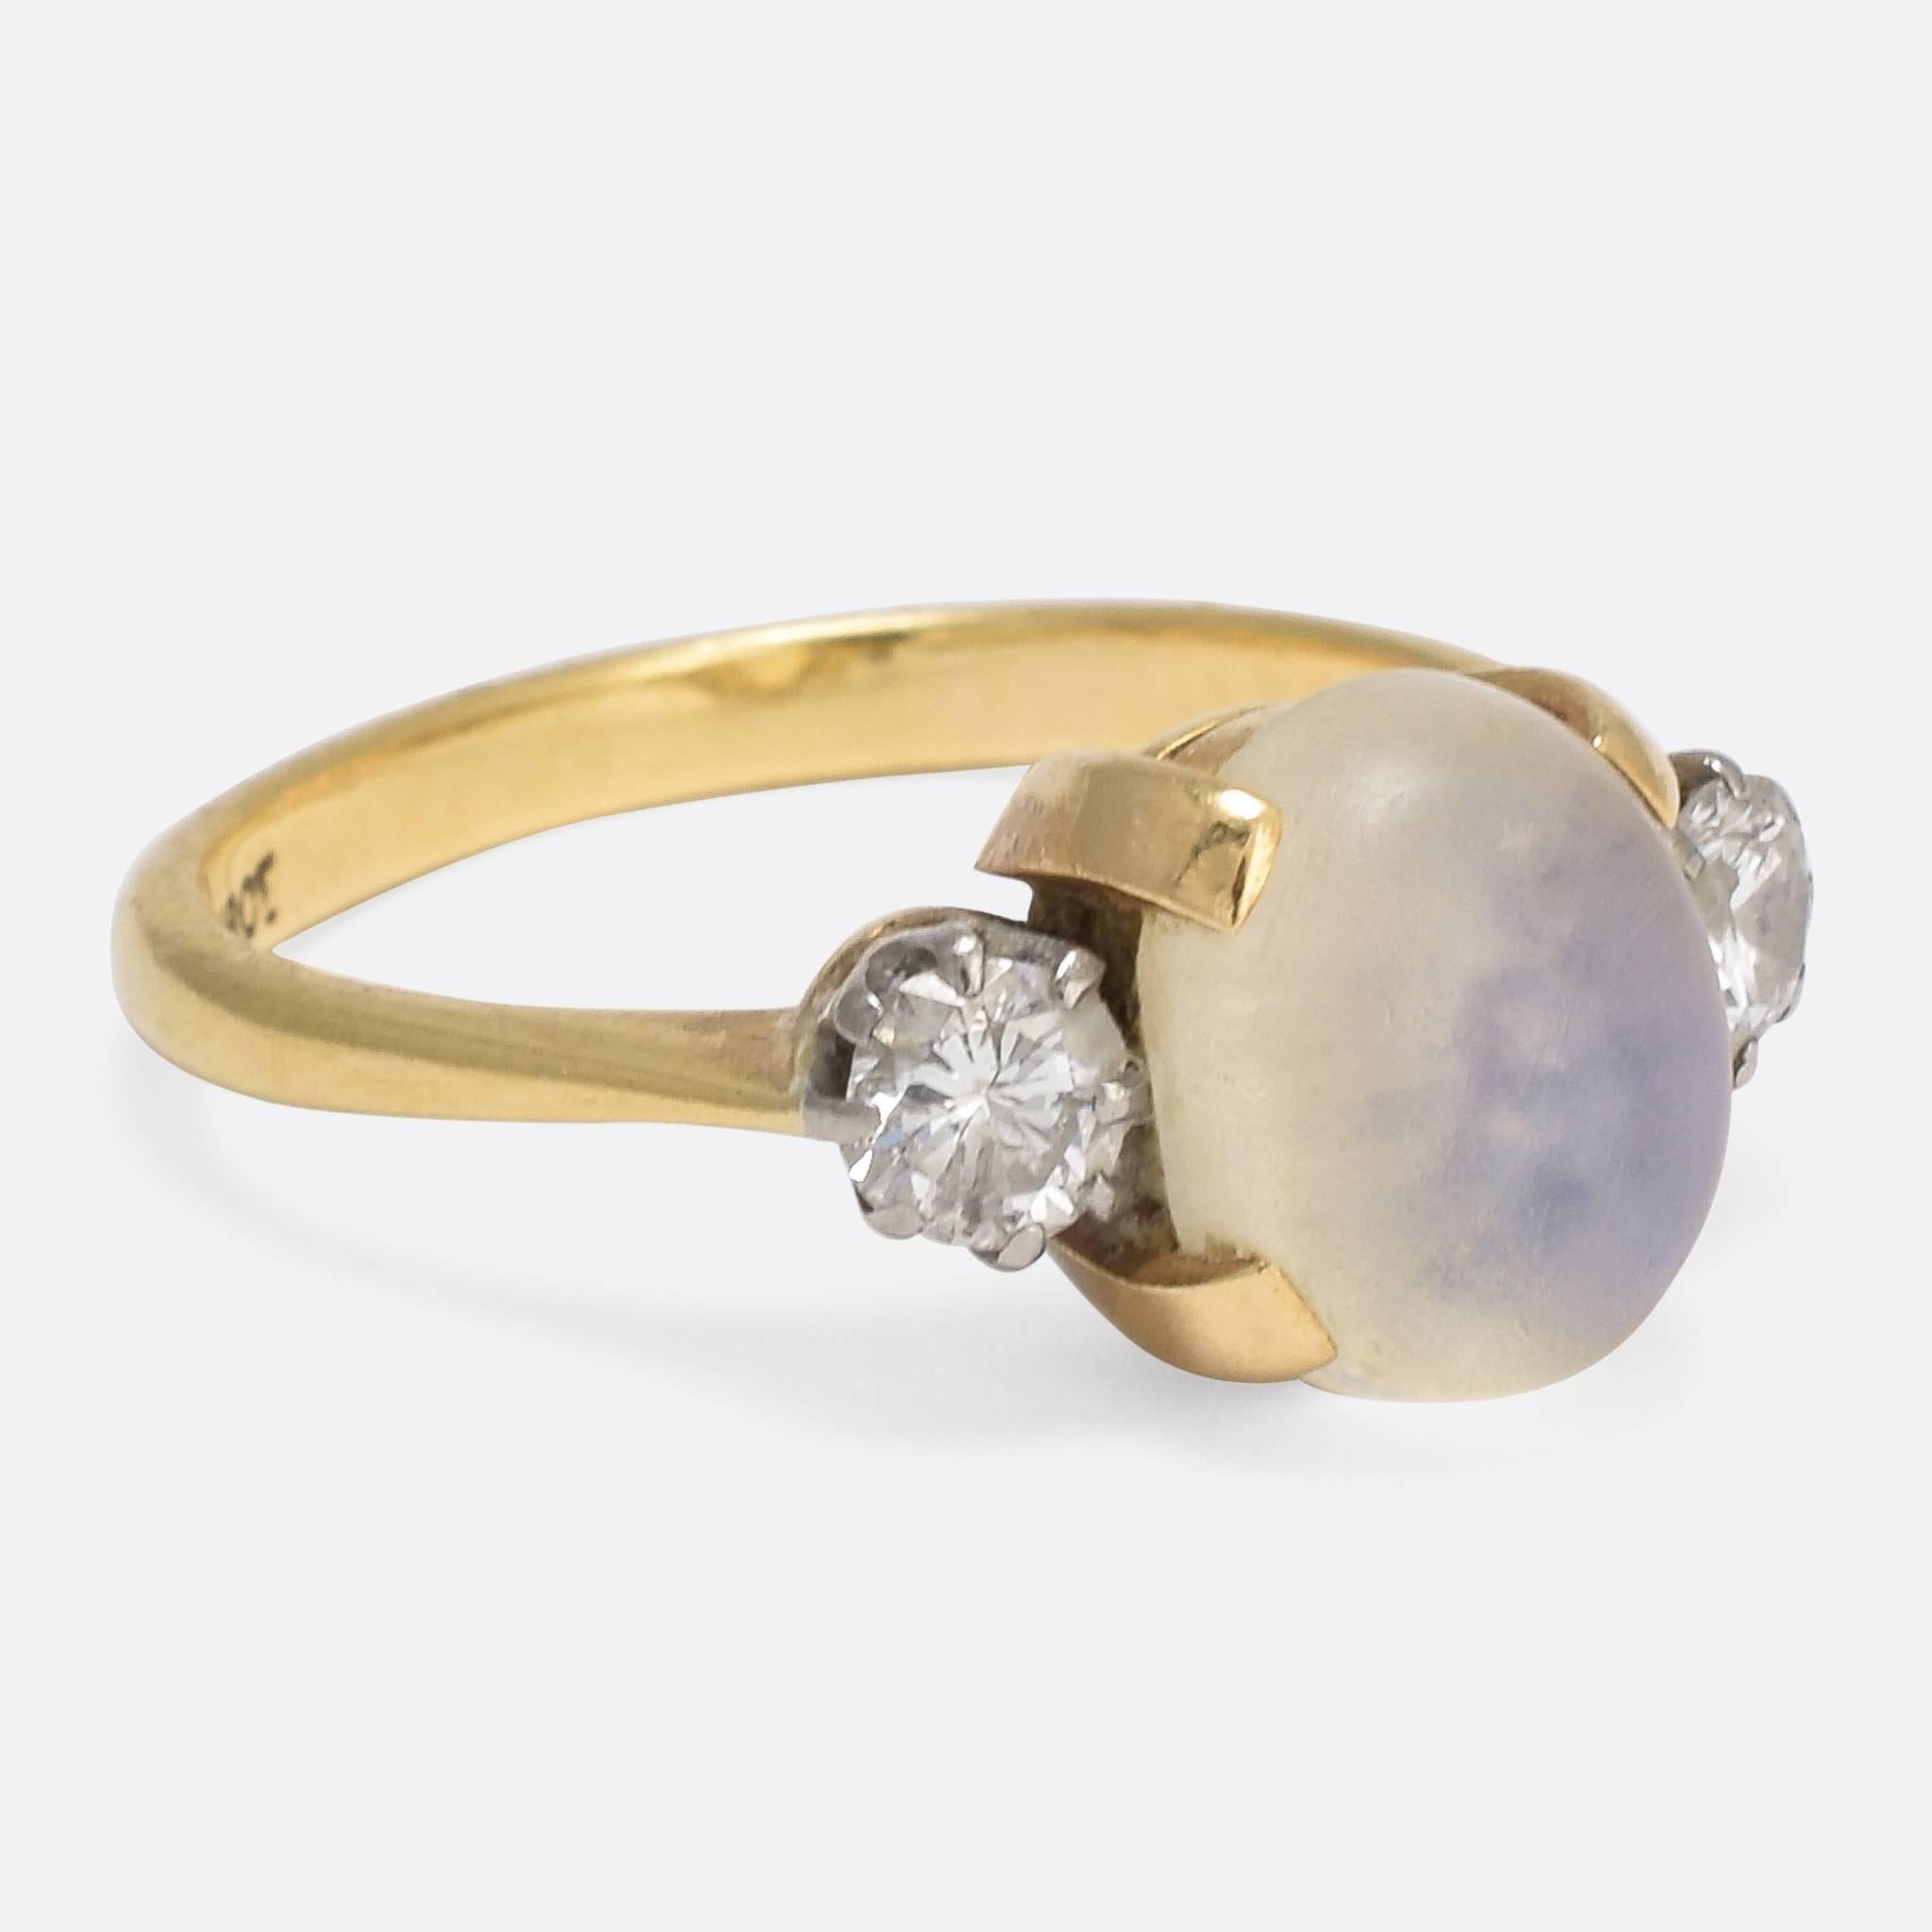 This superb 1920s ring is set with a central blue moonstone, flanked by two brilliant cut diamonds. Modelled in 18k yellow gold, the diamonds are set is white gold claw mounts to create a lovely two-tone effect. The moonstone displays particularly